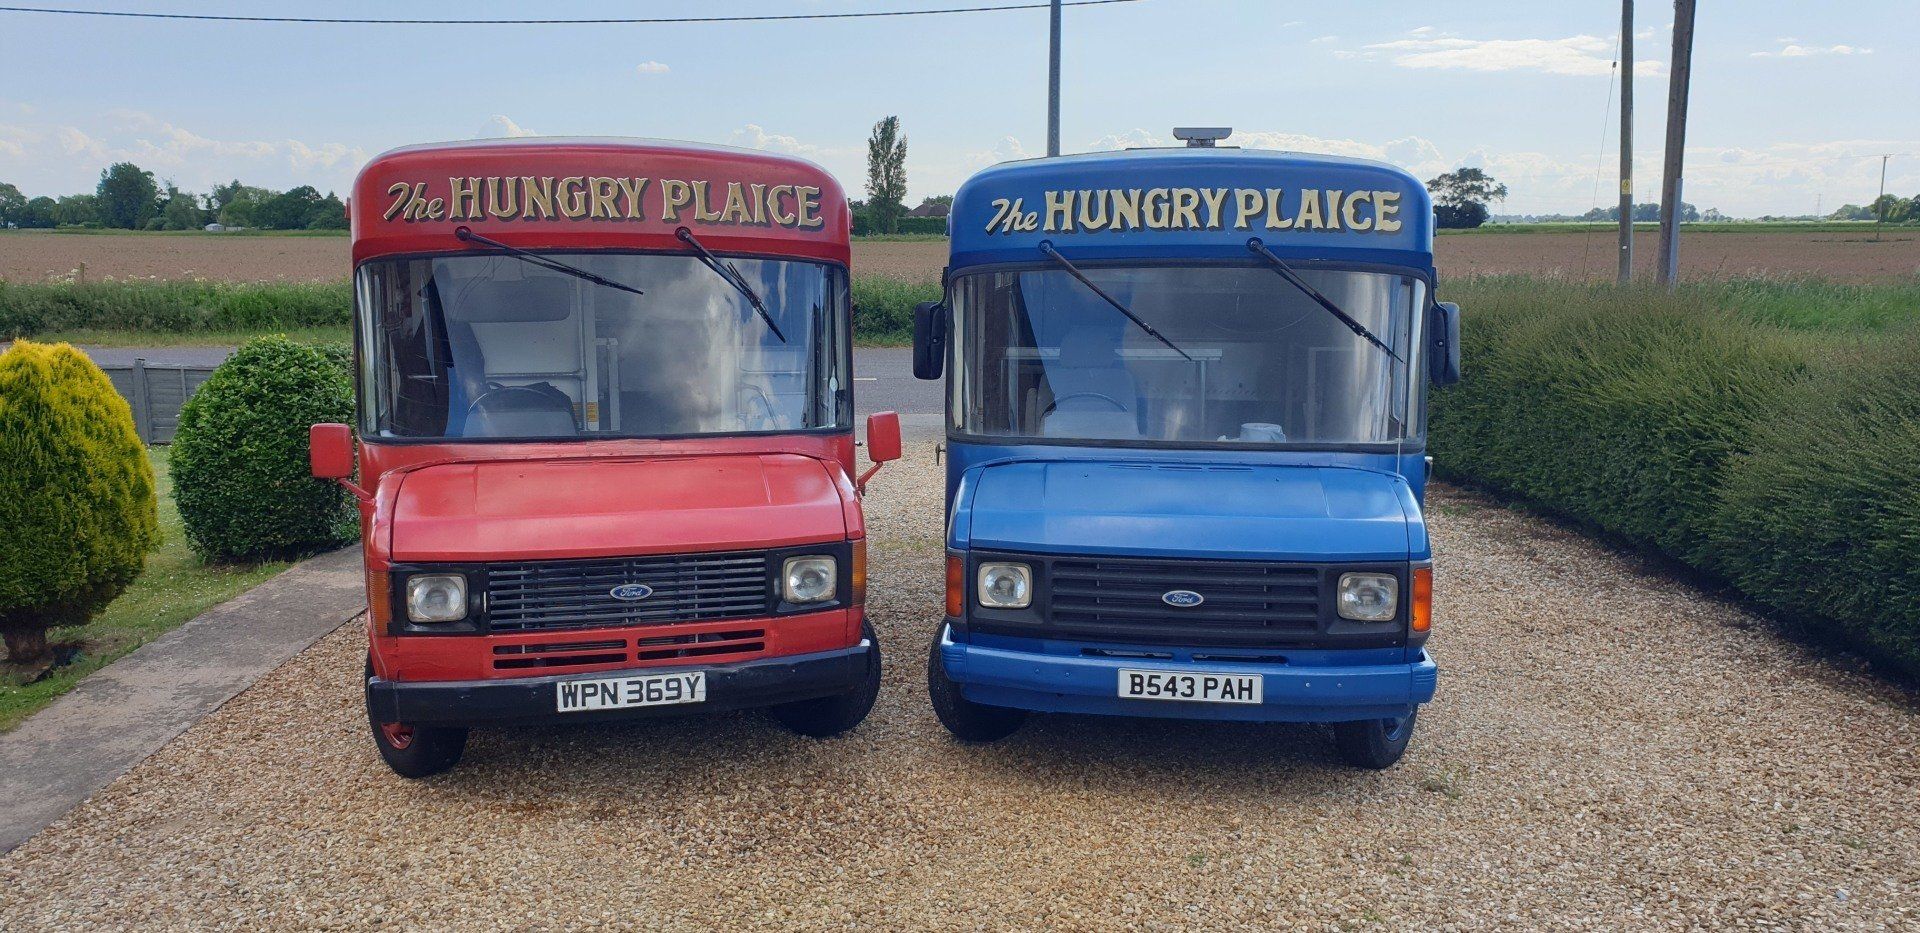 Vintage Fish And Chip Van Hire - Wedding Catering - Event Catering - The Hungry Plaice